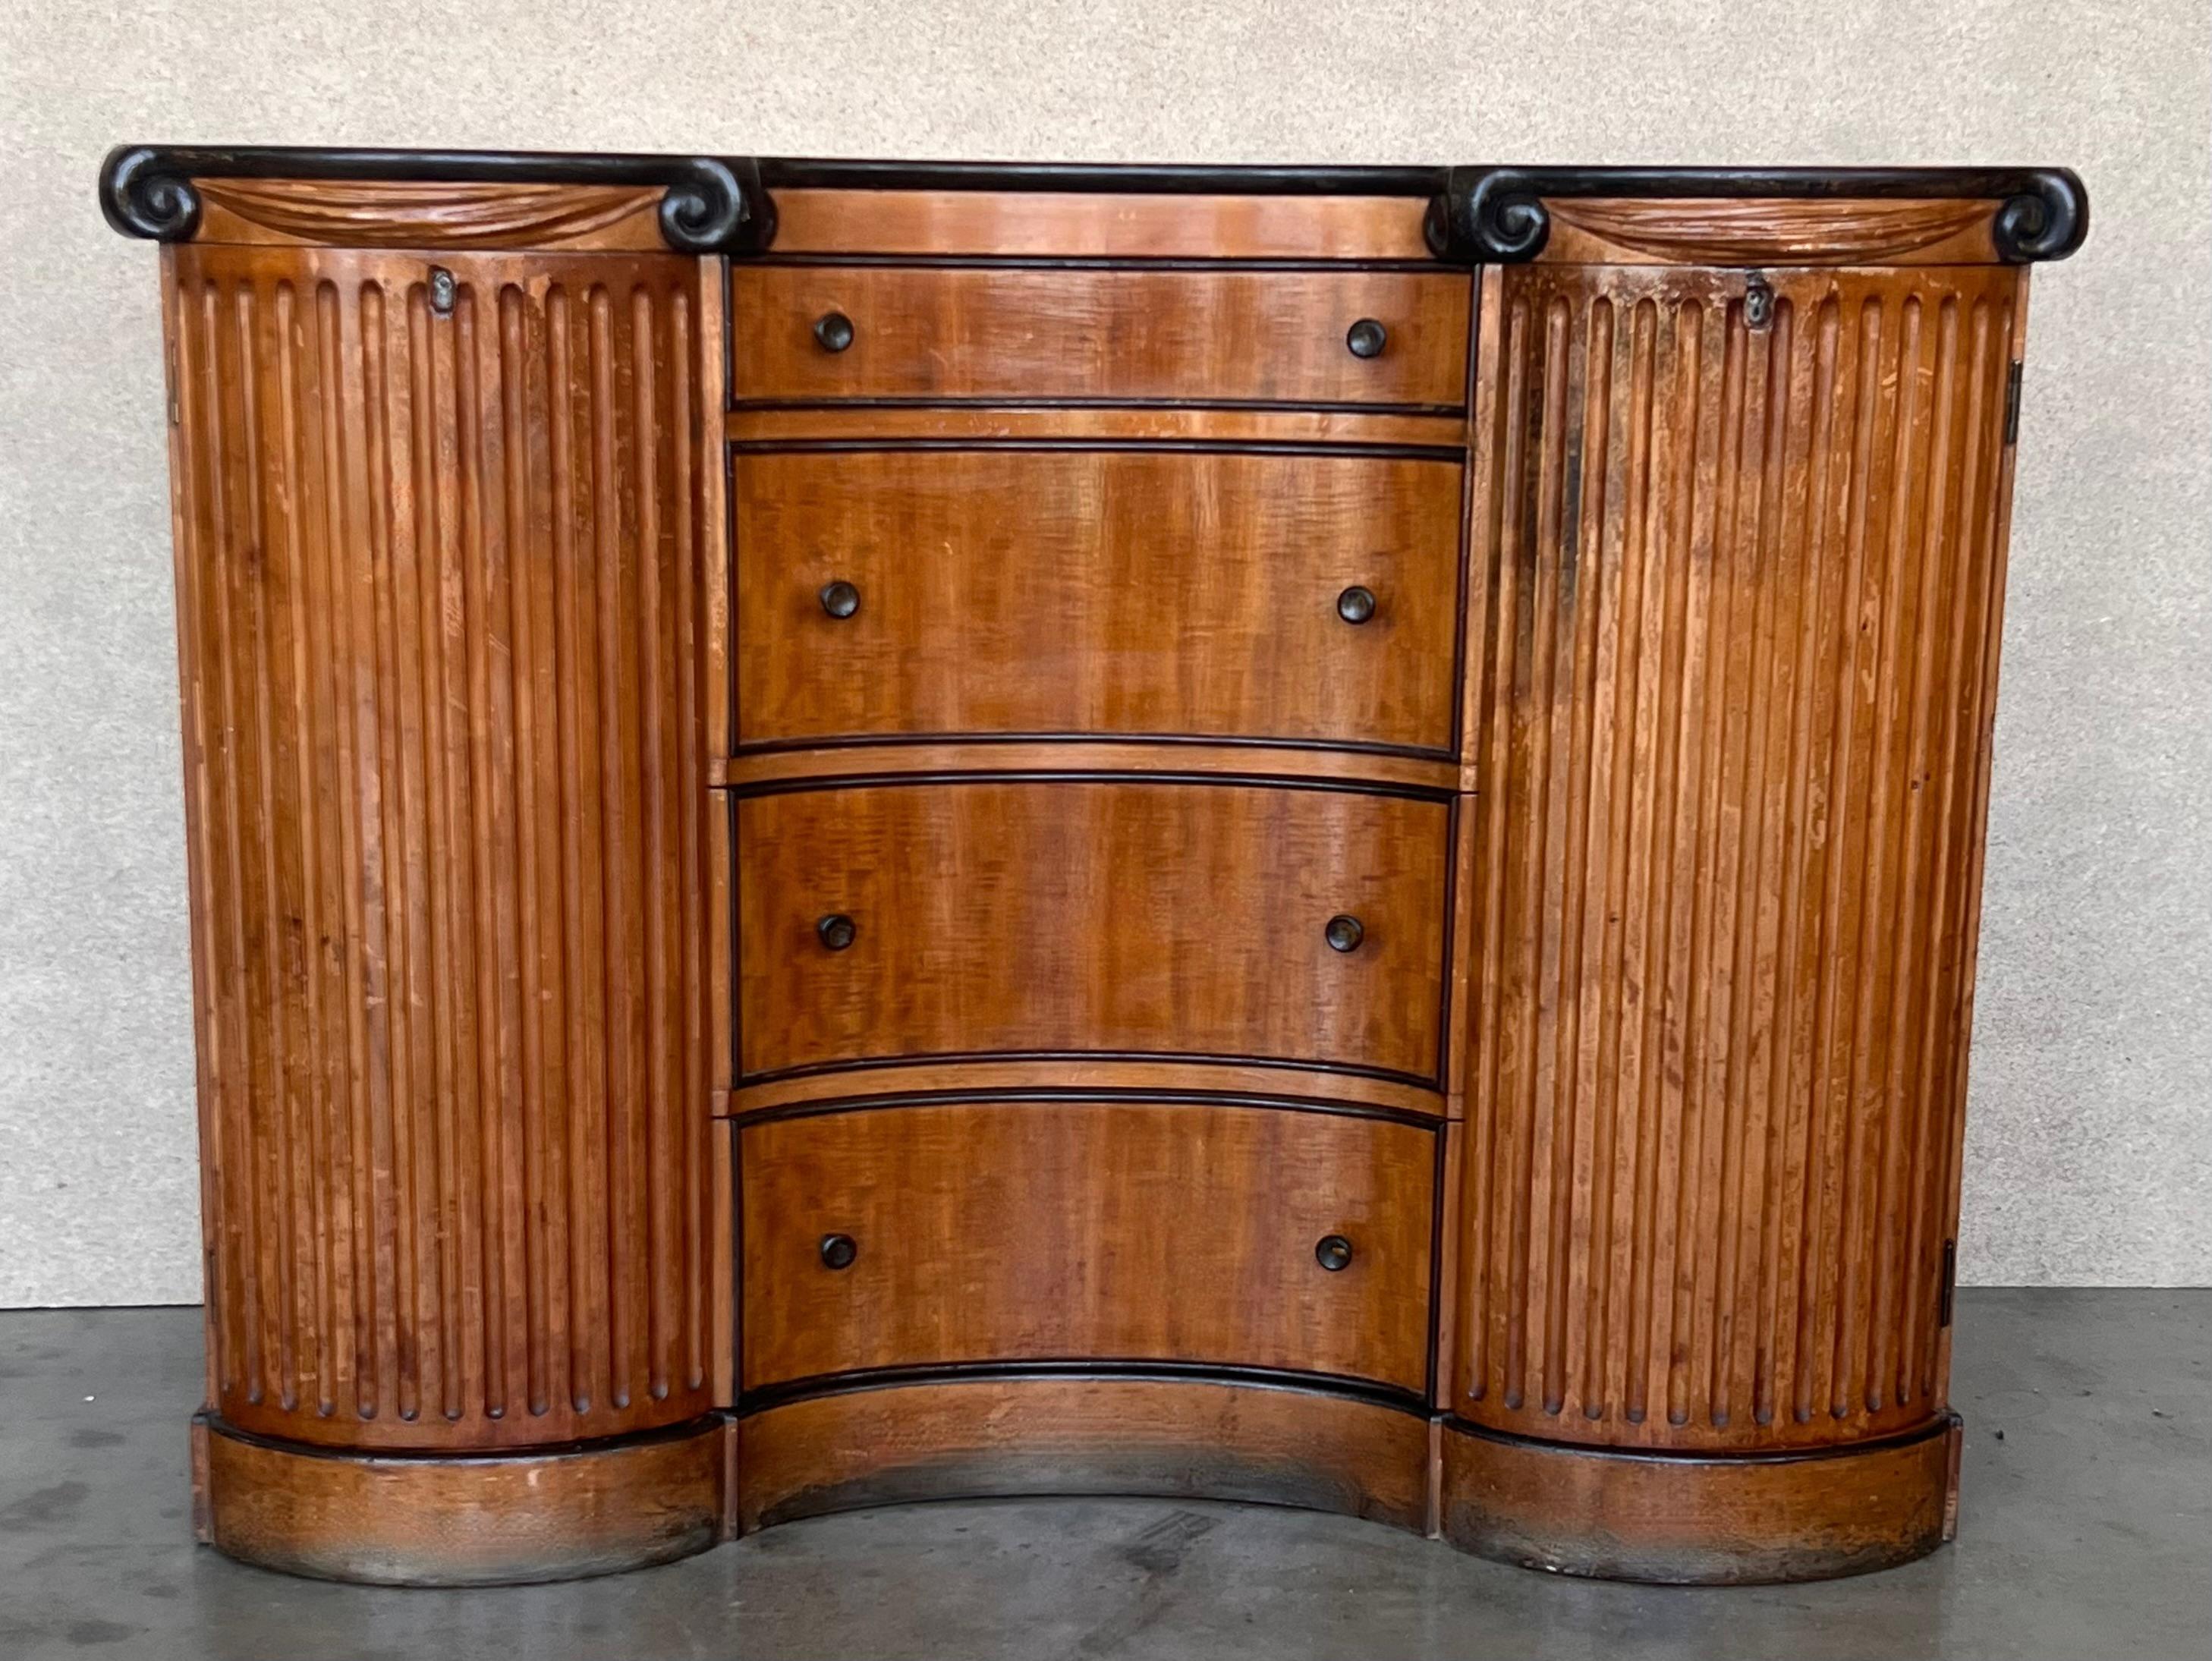 An extraordinary, very fine quality, circa 1920s French burled walnut sideboard (credenza server bar cabinet buffet chest)   A most impressive masterpiece, exquisitely hand-crafted in the early 20th century, most likely the very finest quality